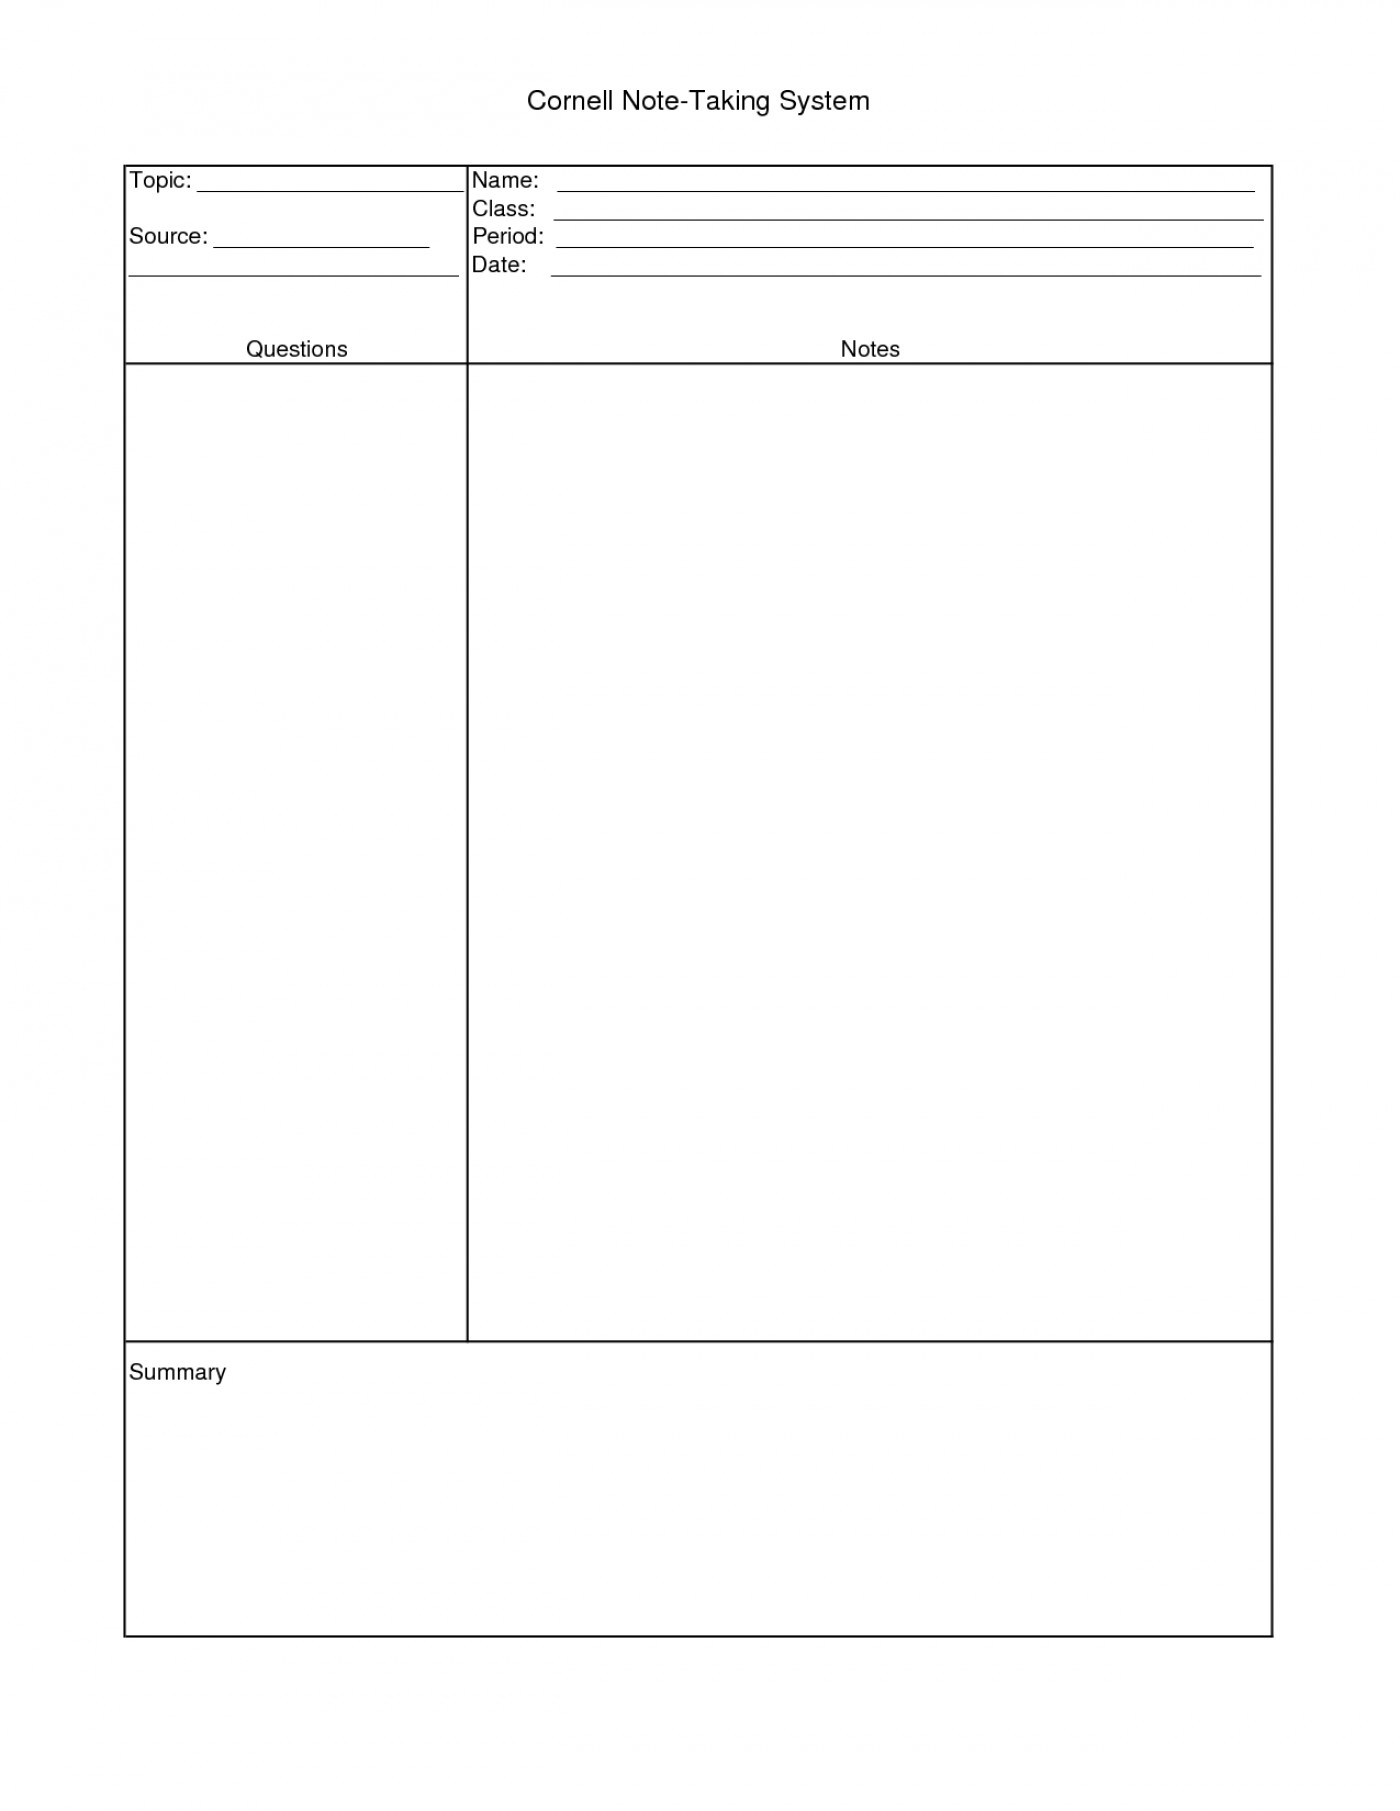 017 Research Paper Cornell Note Taking Template 31547 Cards Intended For Google Docs Cornell Notes Template